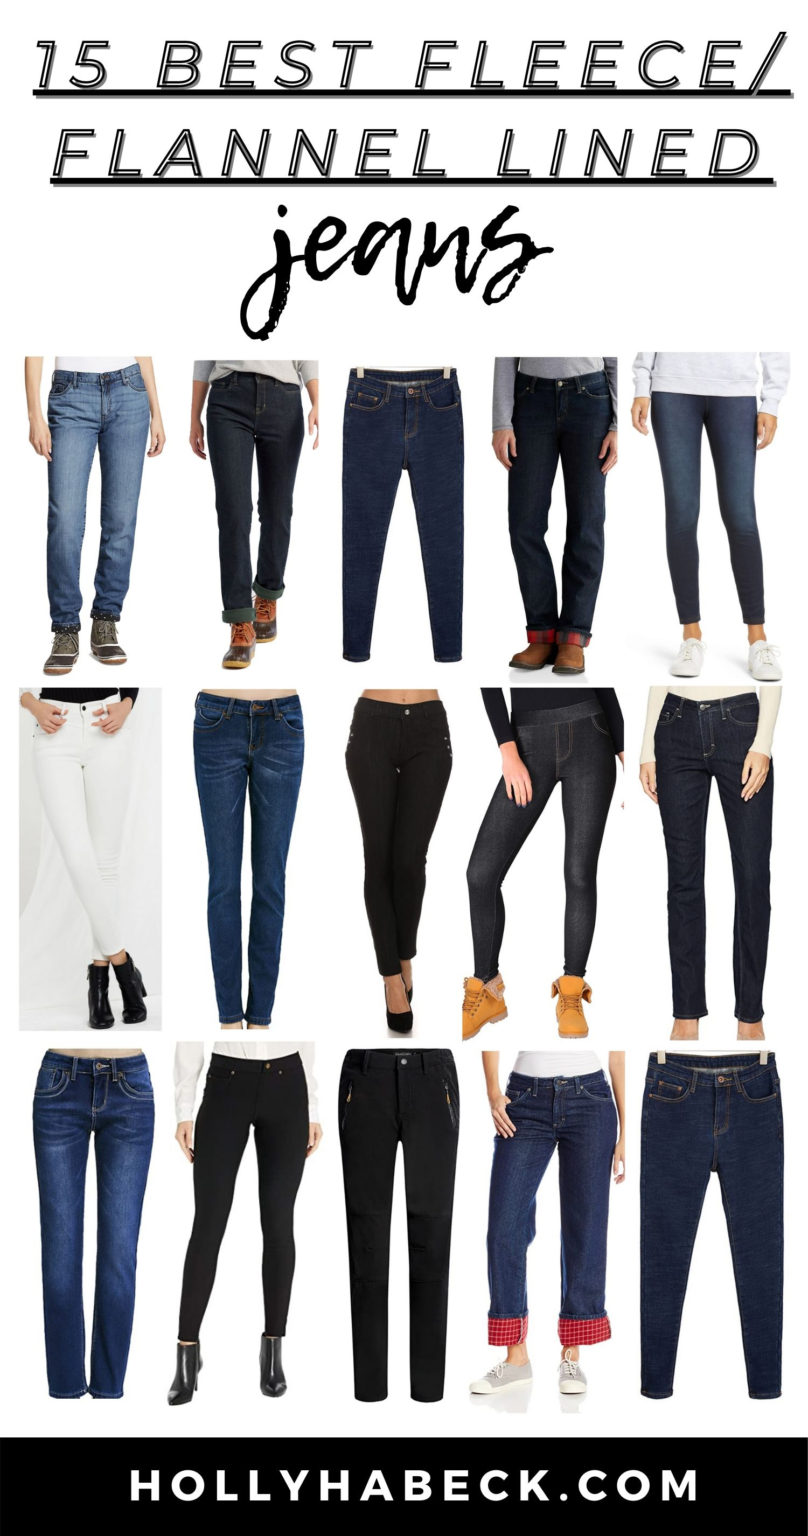 Flannel Lined Jeans — 15 Best Pairs to Keep You Warm - The Honeyed